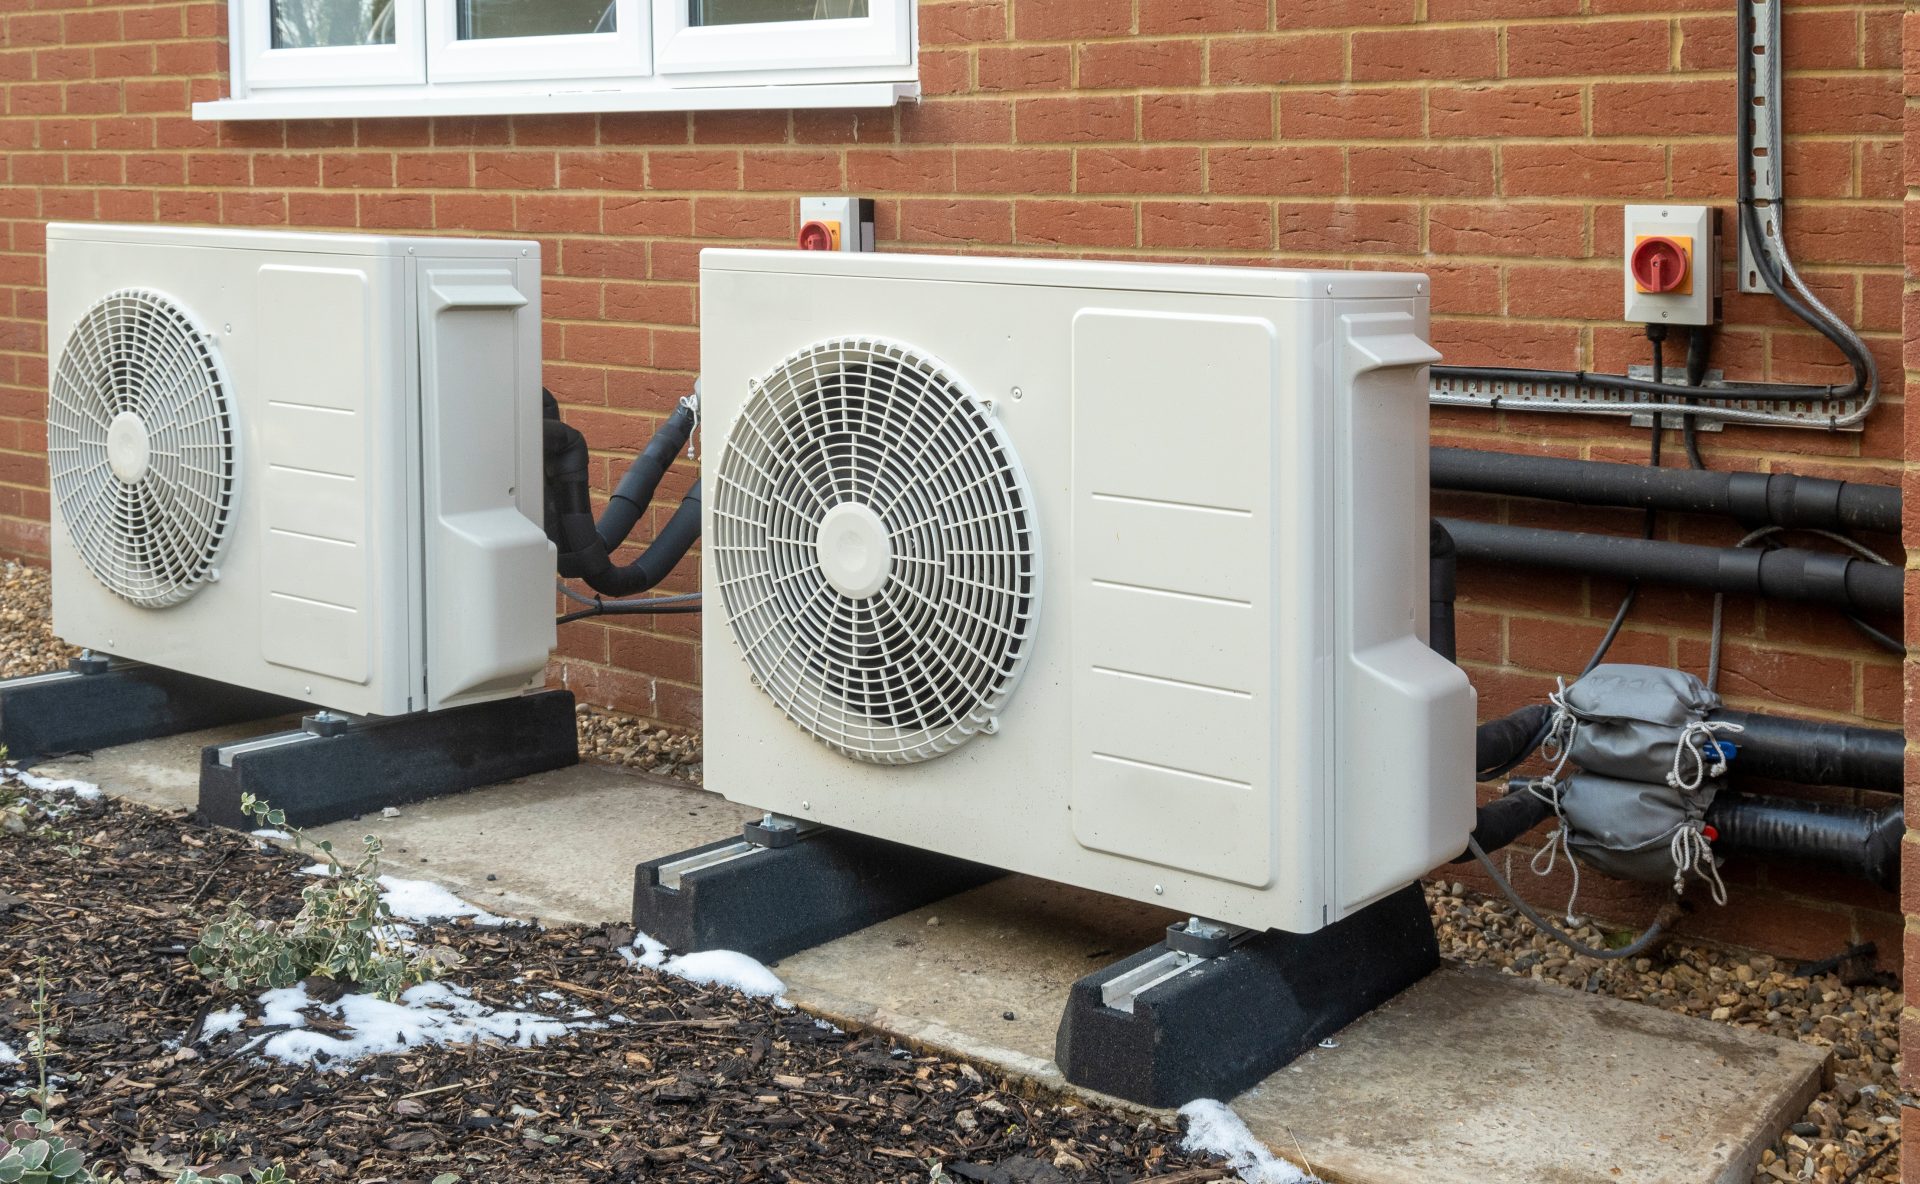 Heat pumps, energy solution for heating